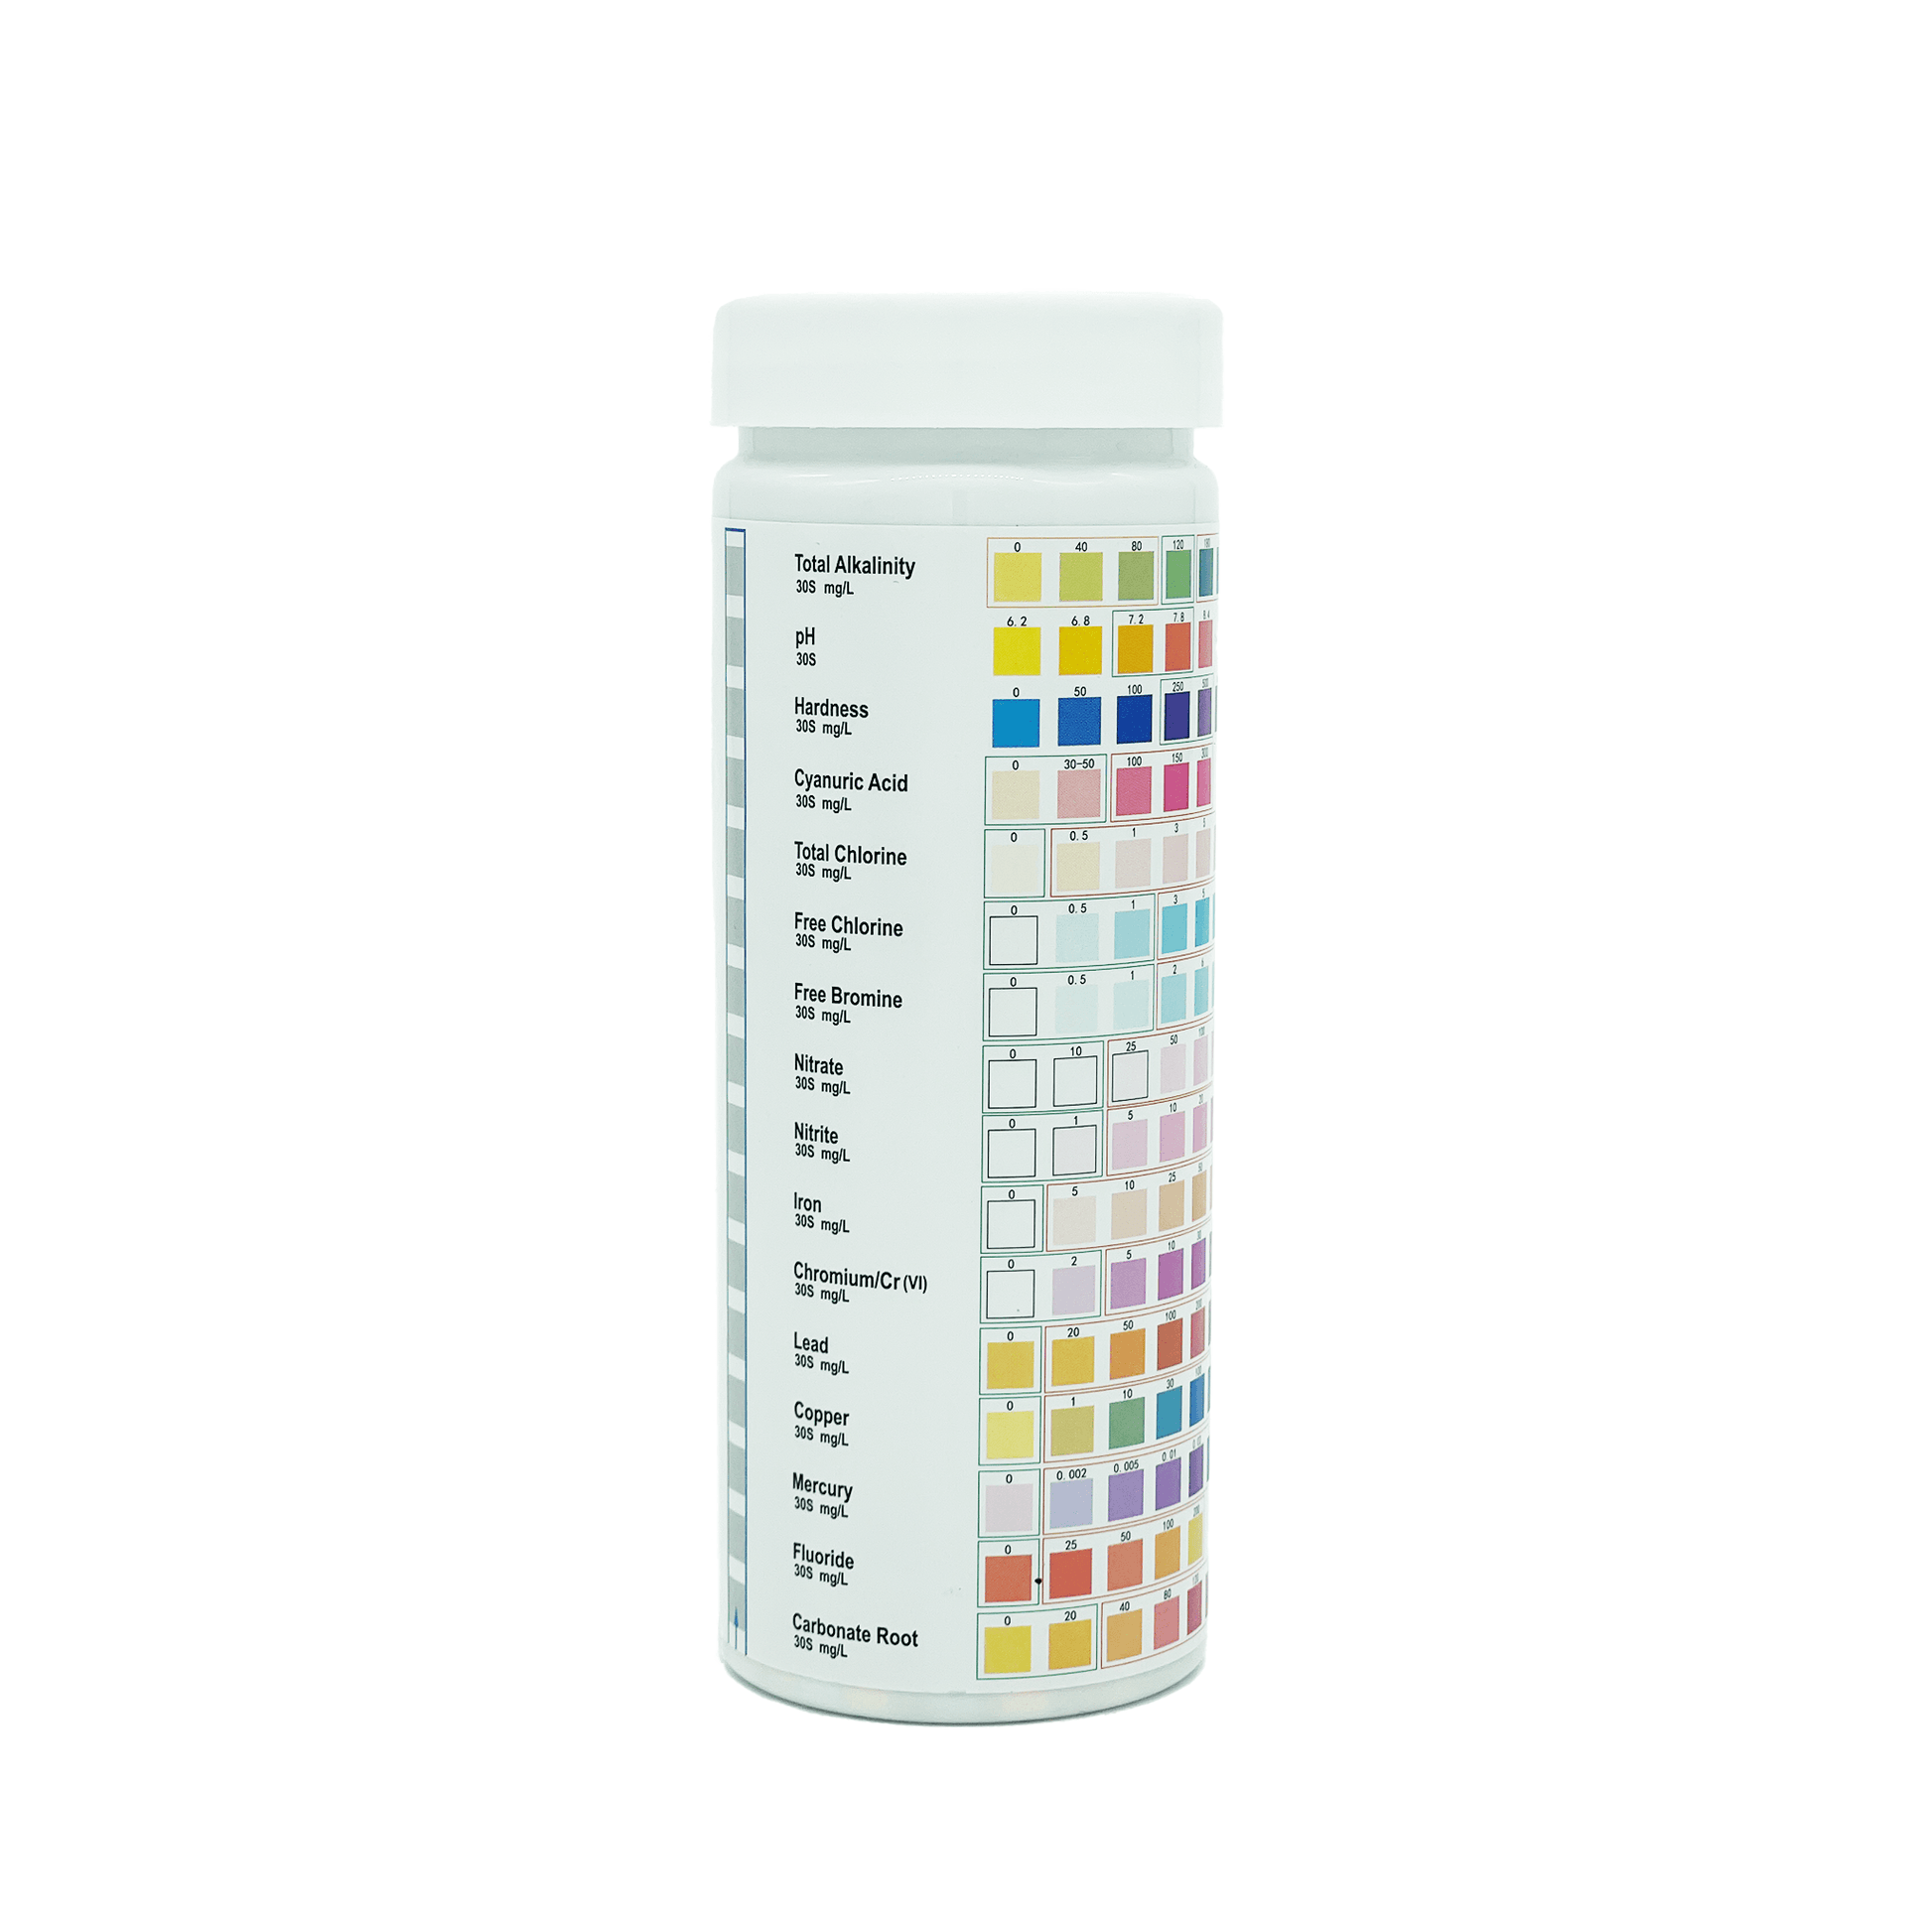 16 in 1 Full Panel Strips for Water Quality Testing - Homedoc